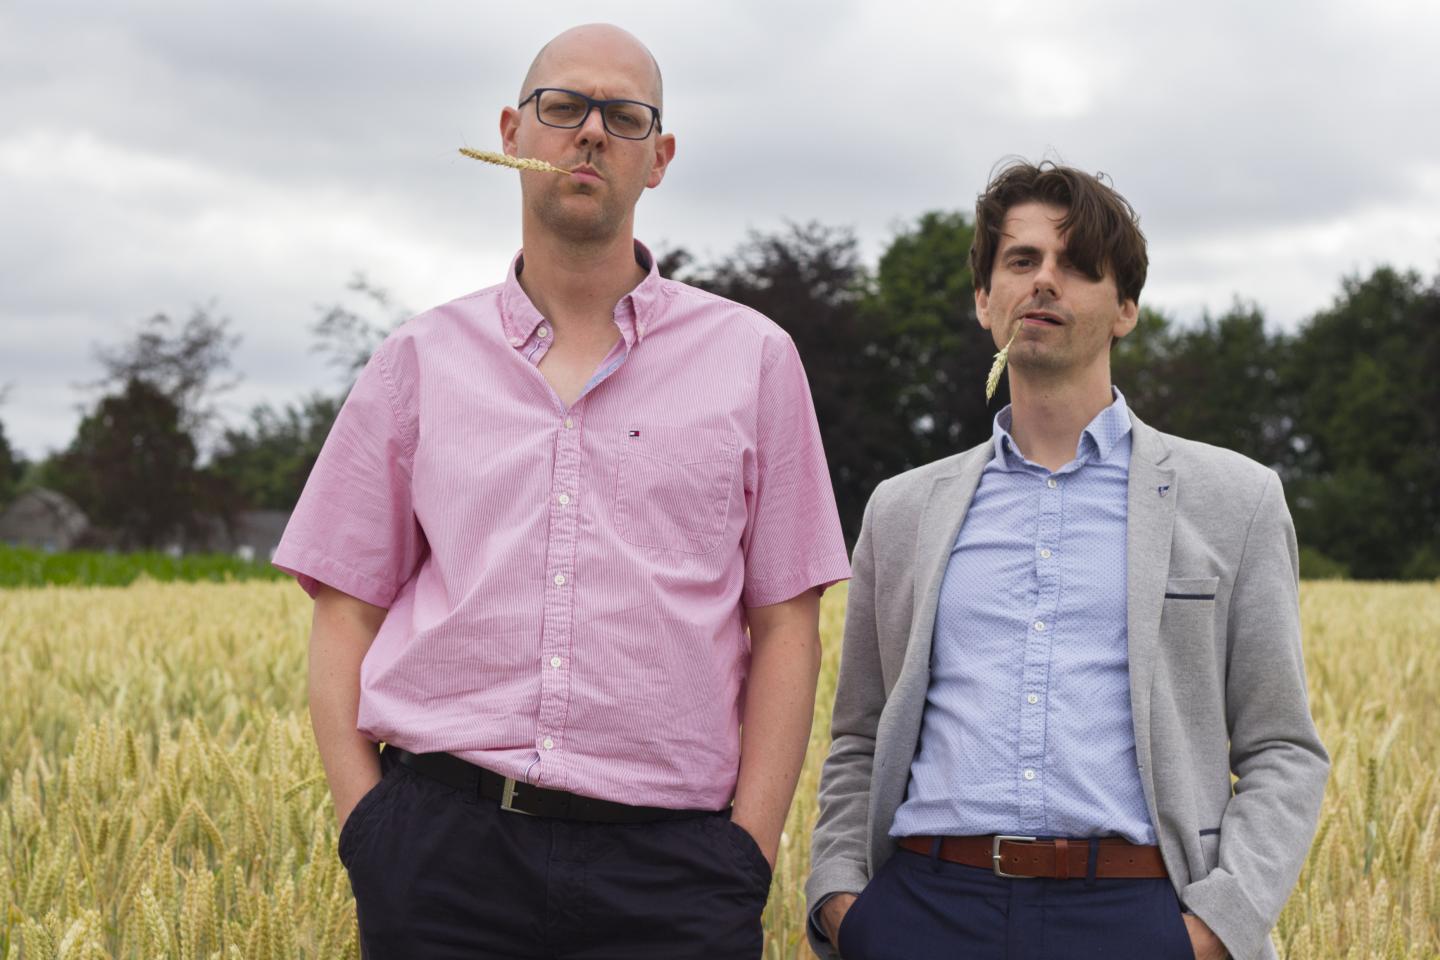 Ive De Smet and David Vergauwen in a Wheat Field